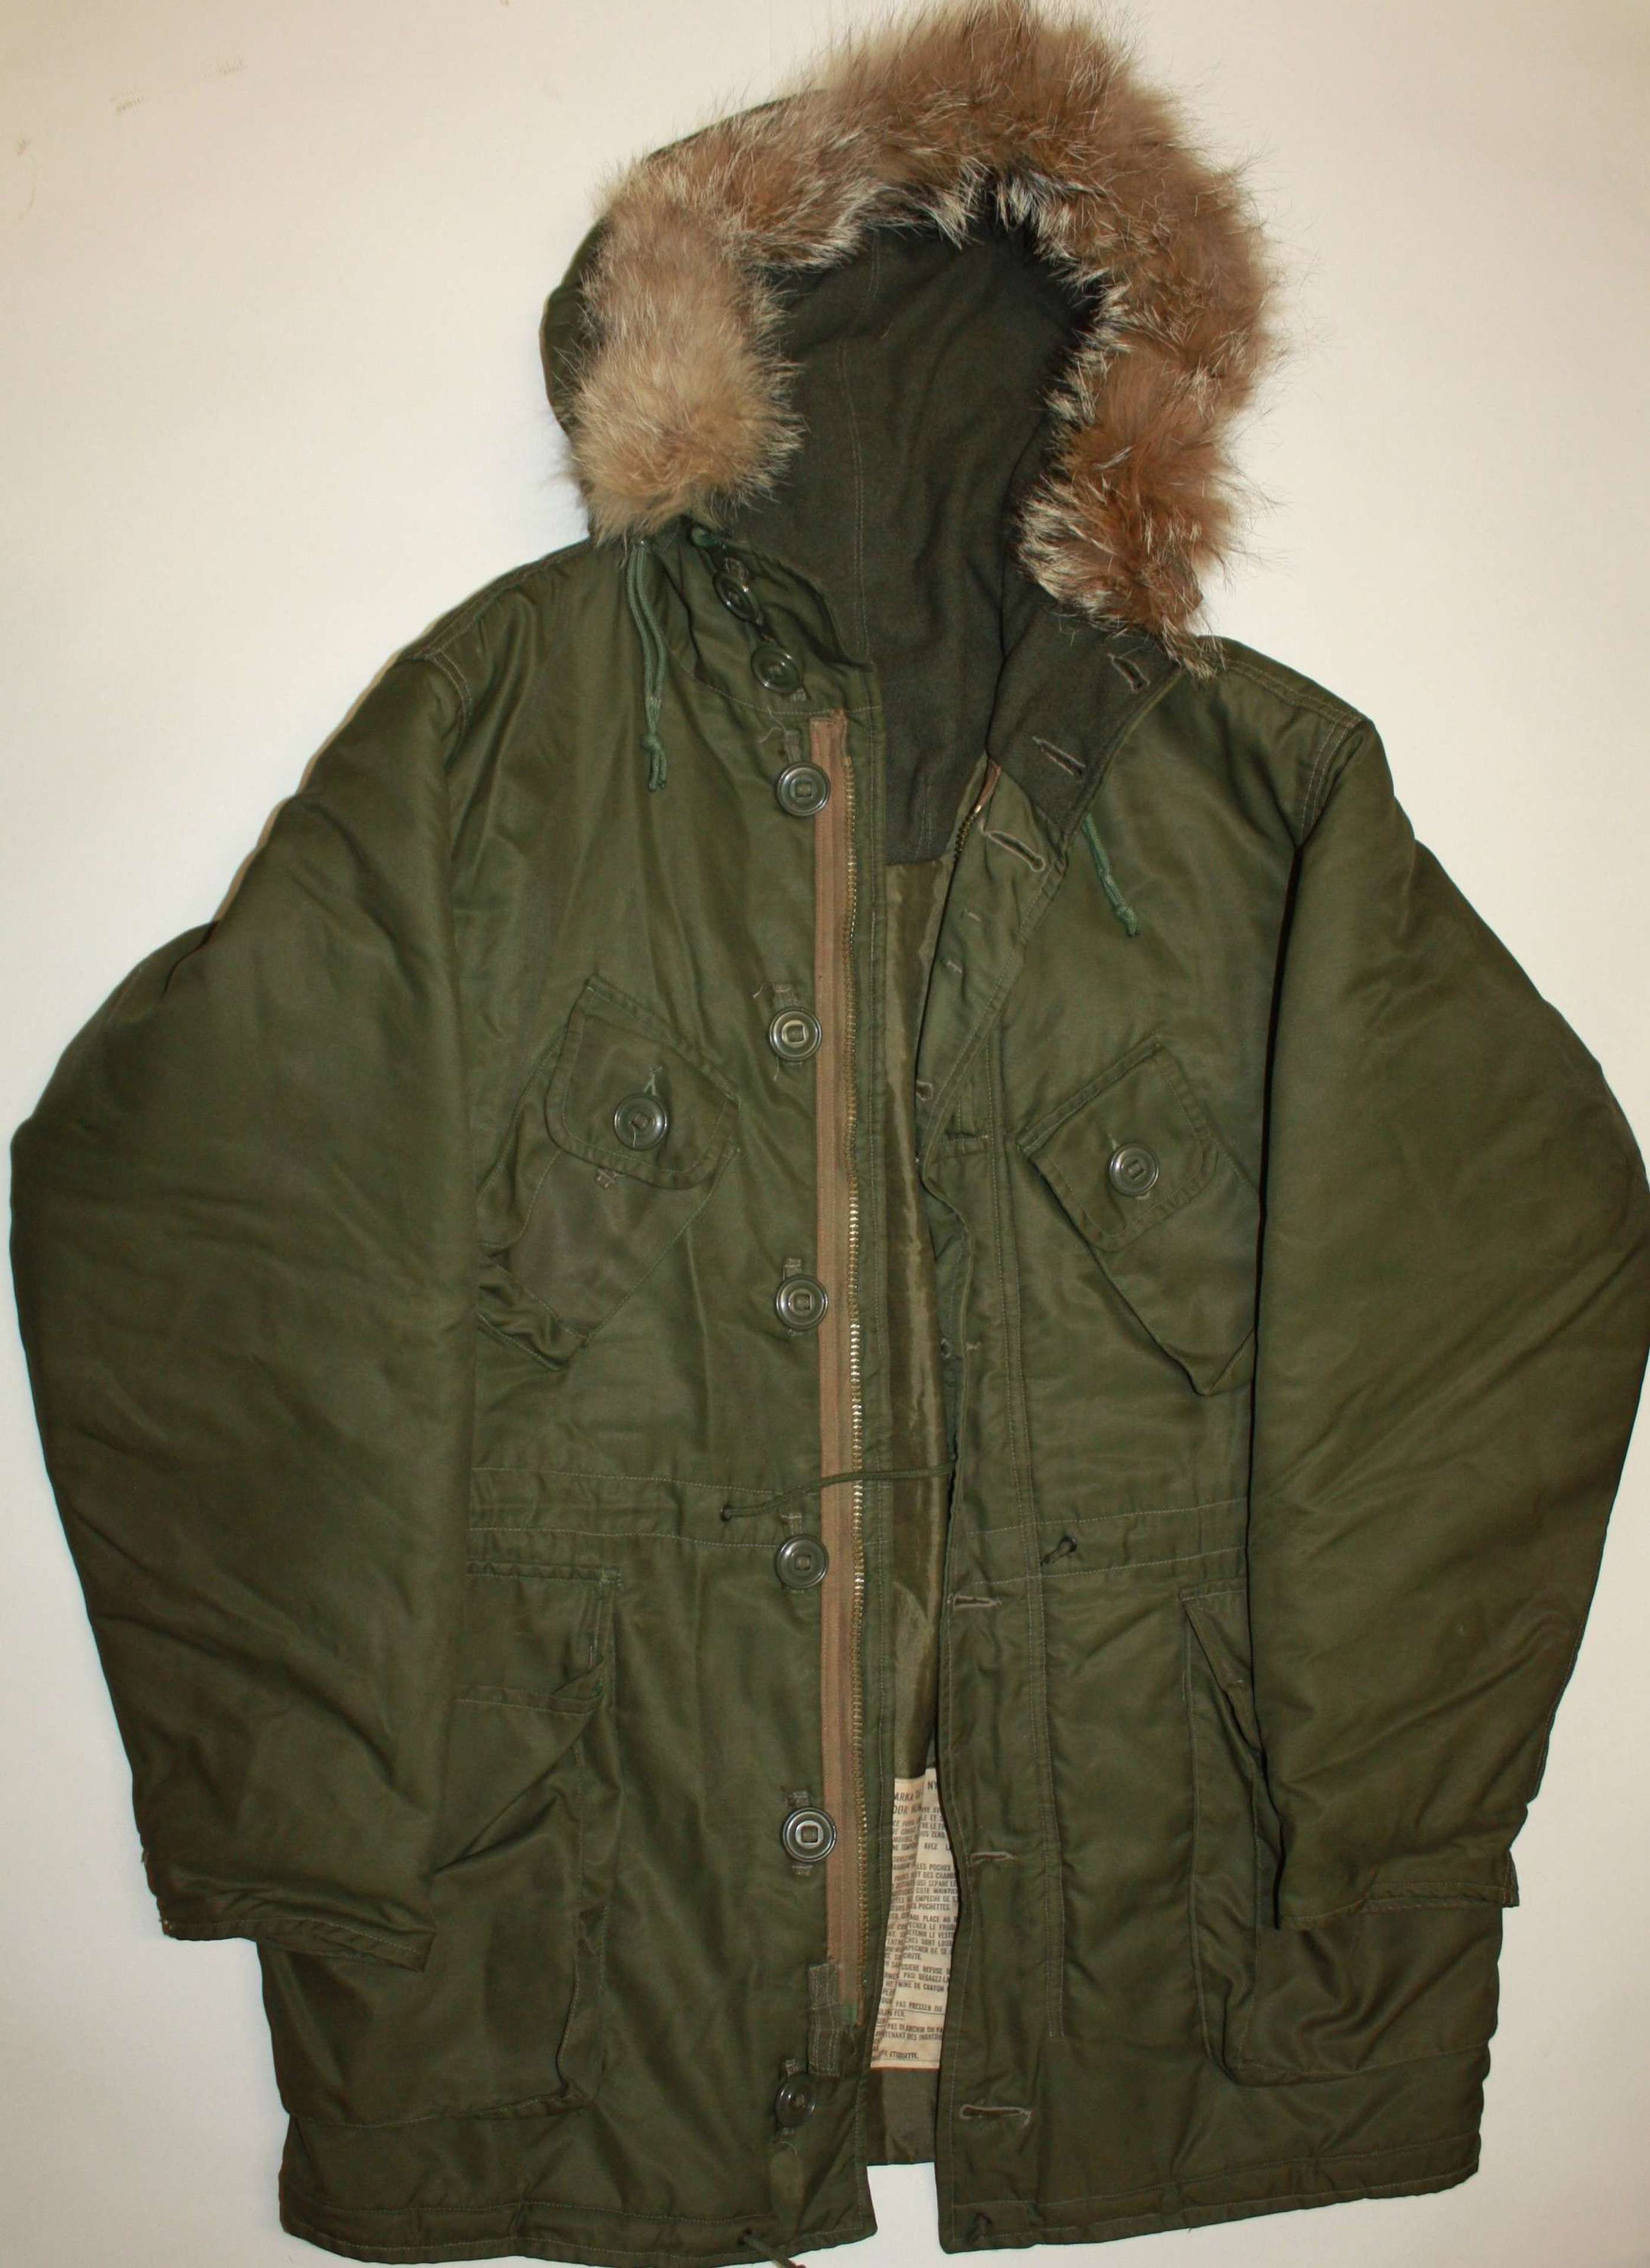 A VERY GOOD 1974 DATED CANADIAN EXTREAM COLD WEATHER PARKER COAT